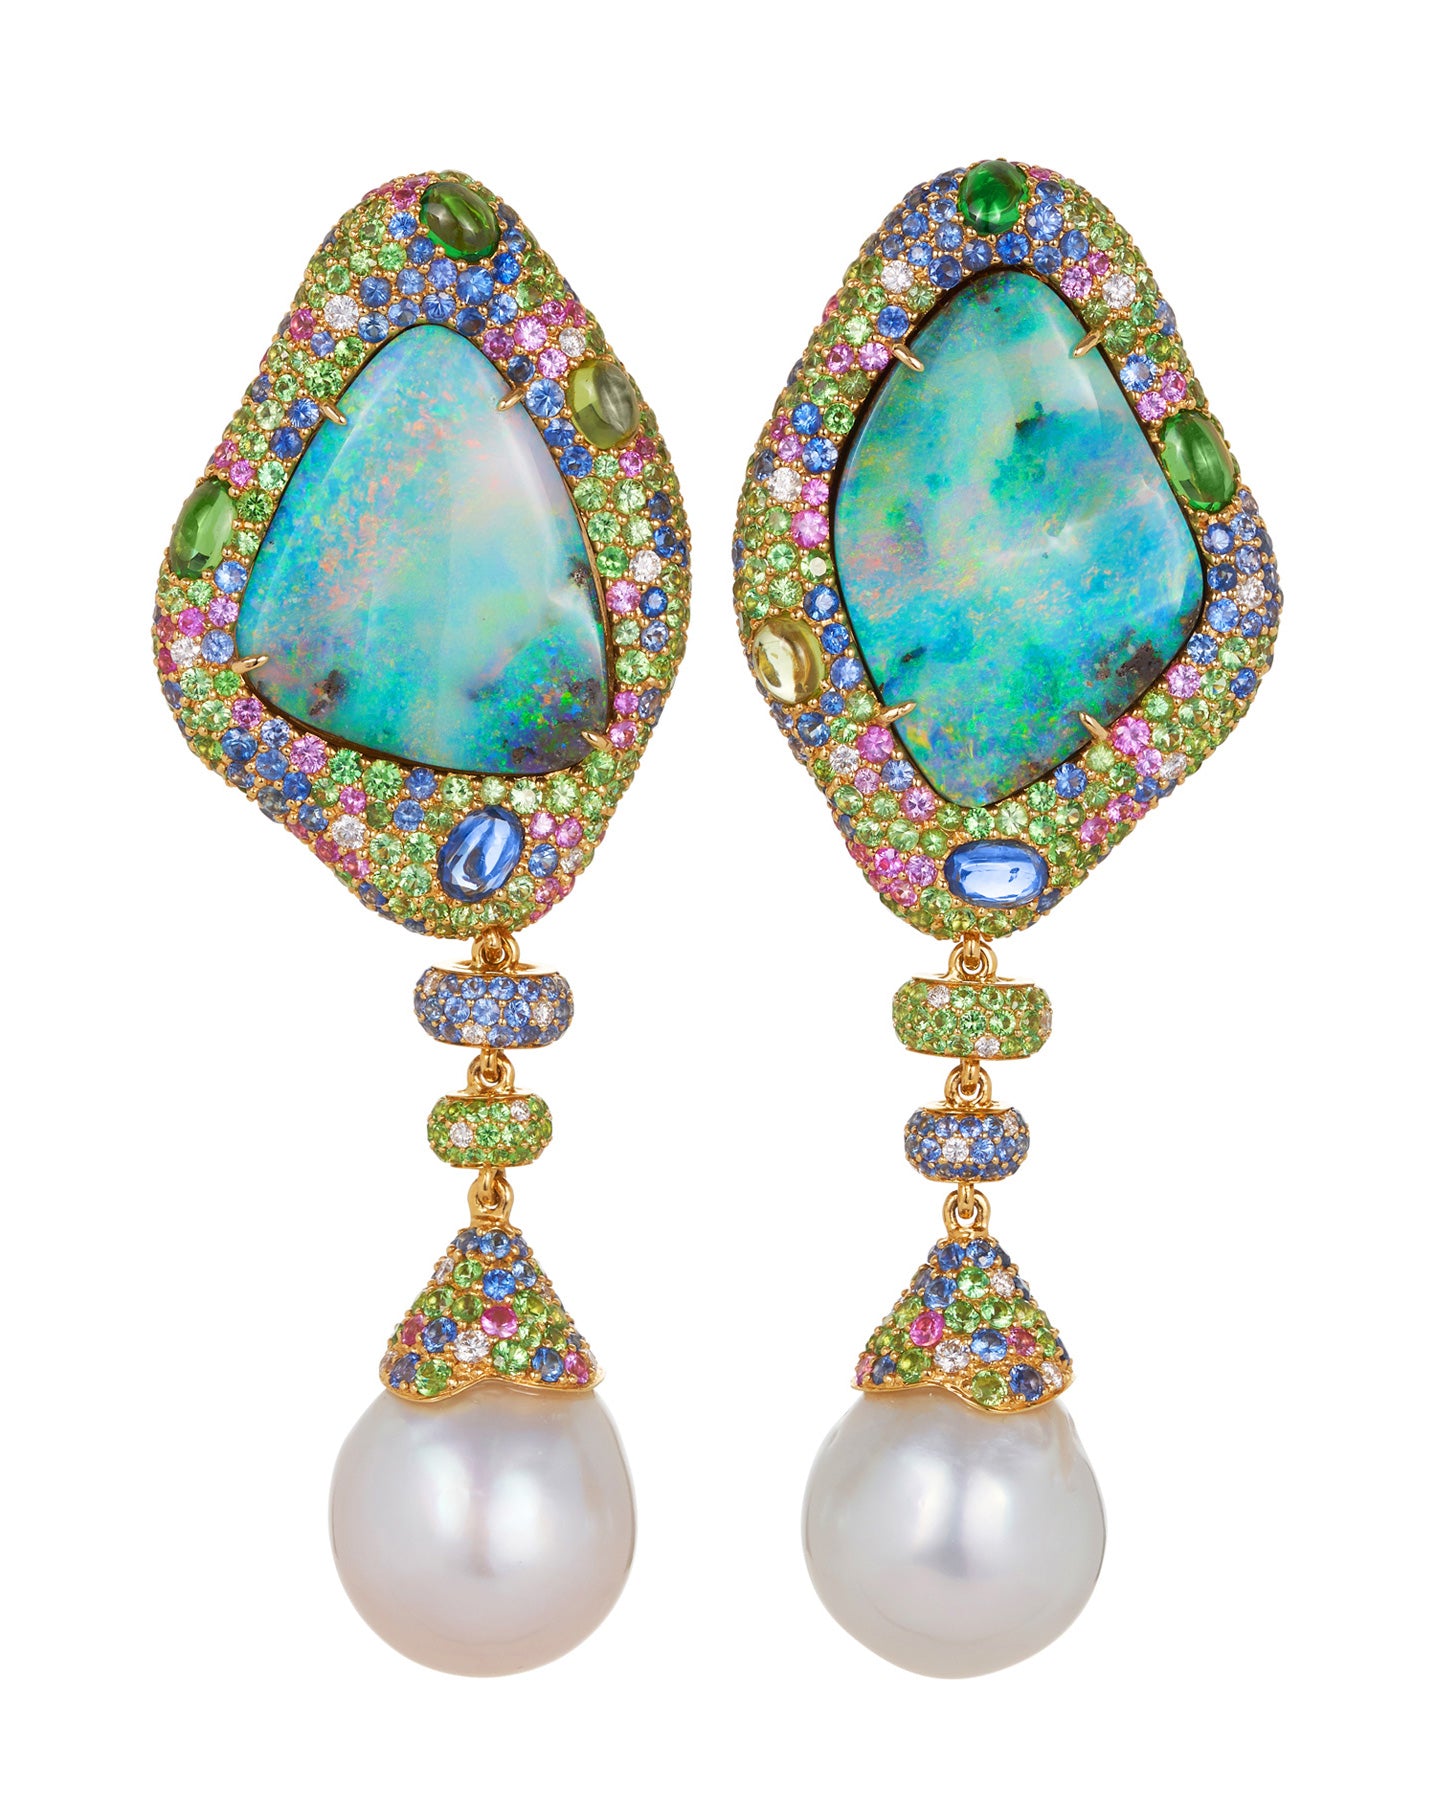 Australian Boulder Opal 32.20ct Earrings surrounded by Diamonds, Blue Sapphires, Pink Sapphires, Tsavorite, Peridot and South Sea Pearl Drops